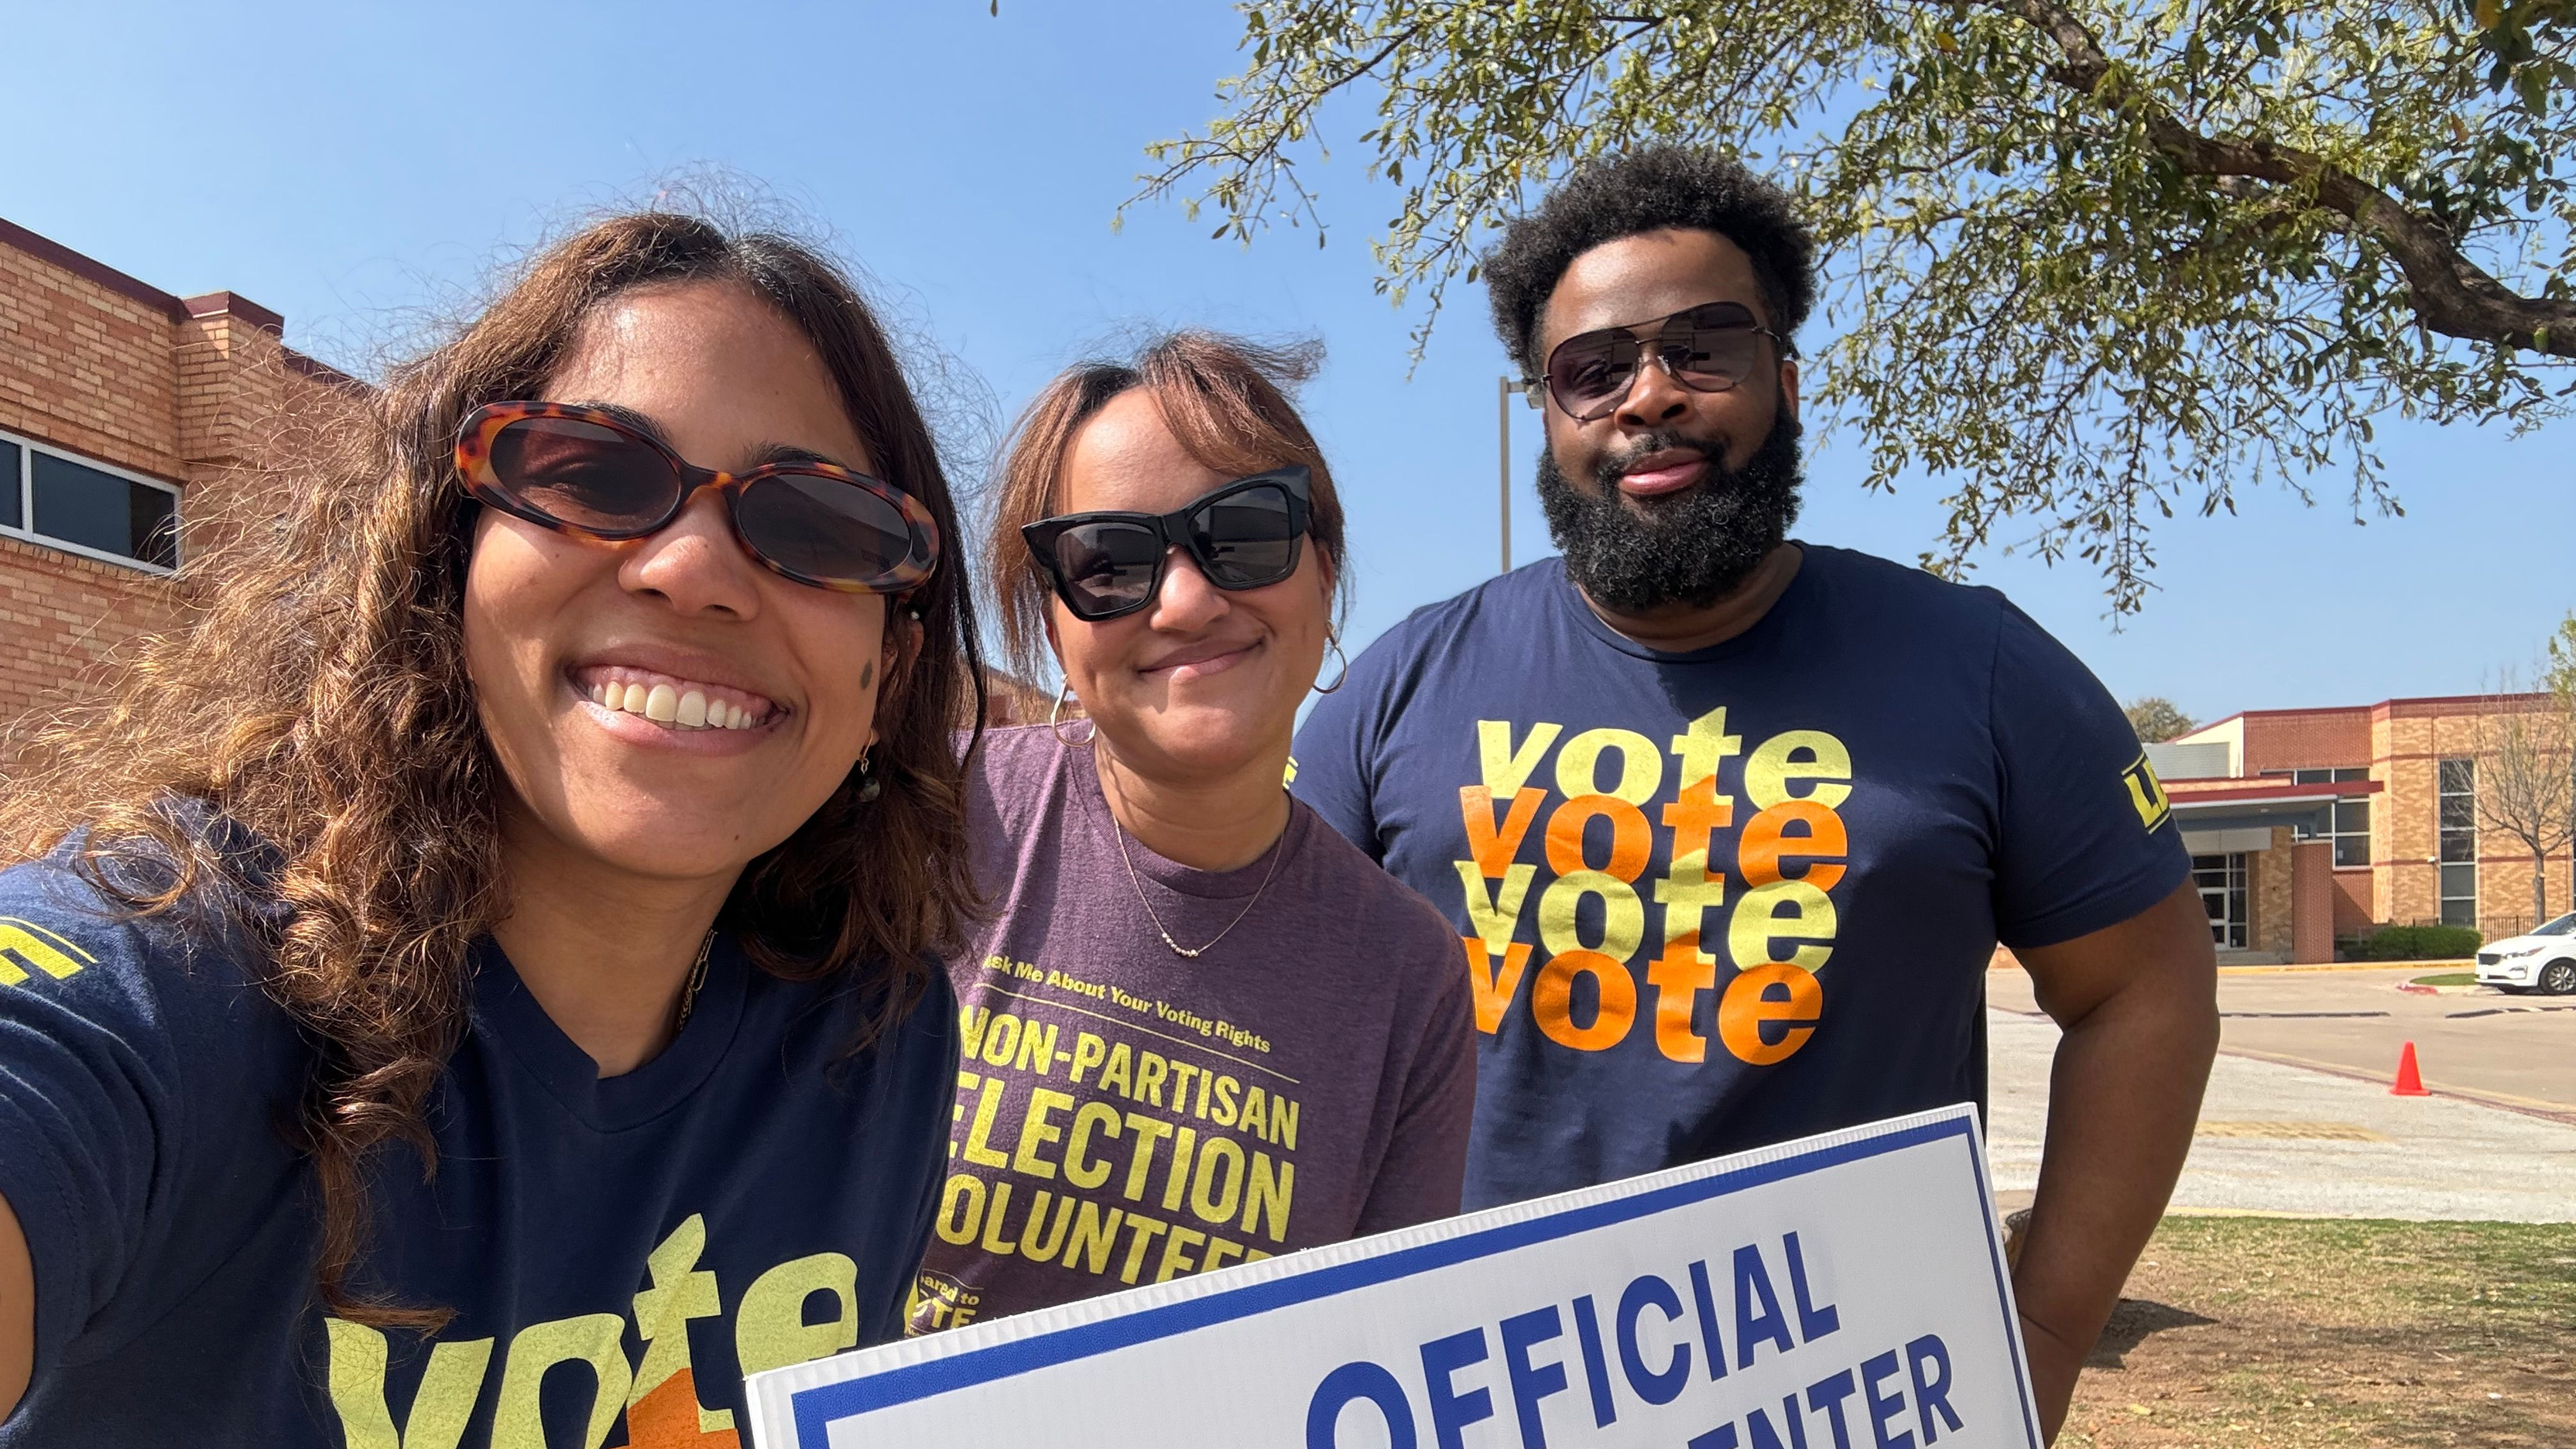 Three nonpartisan election volunteers outside a poll site on a sunny day wearing sunglasses